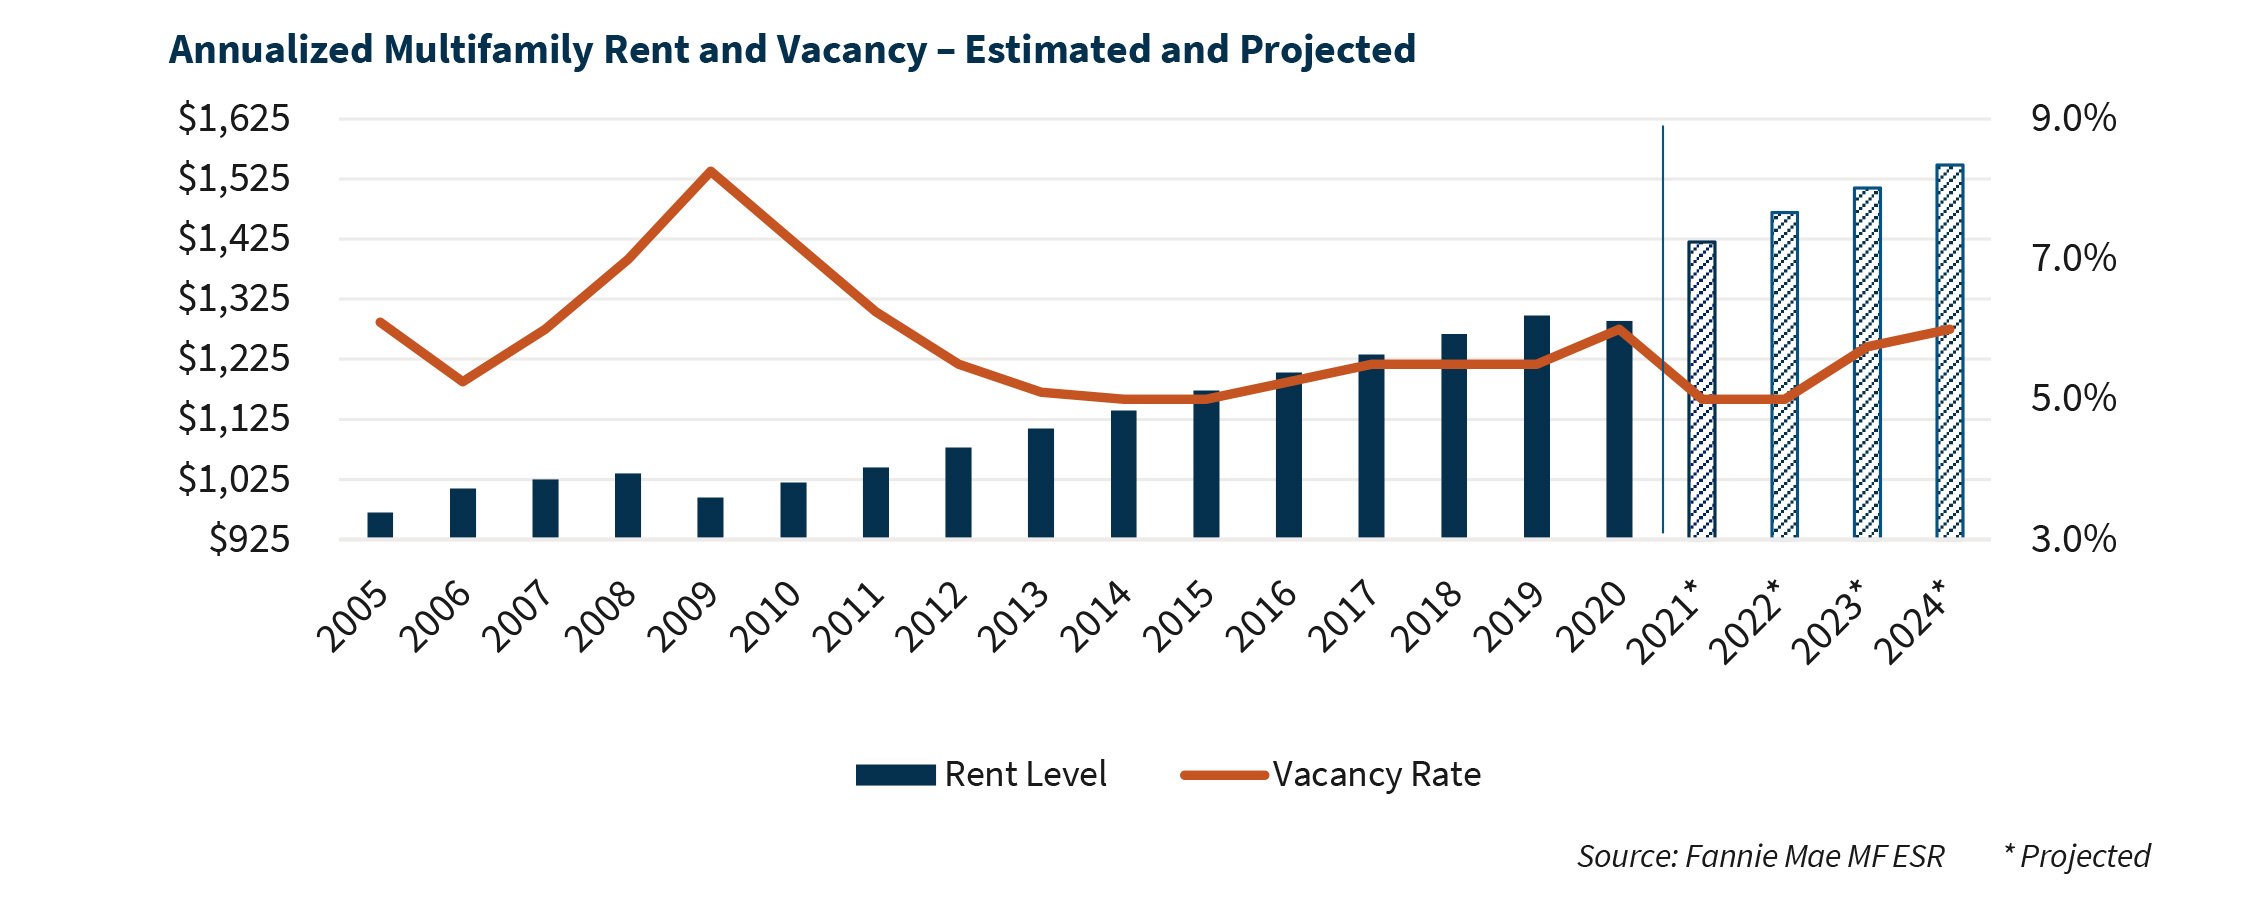 Annualized Multifamily Rent and Vacancy – Estimated and Projected